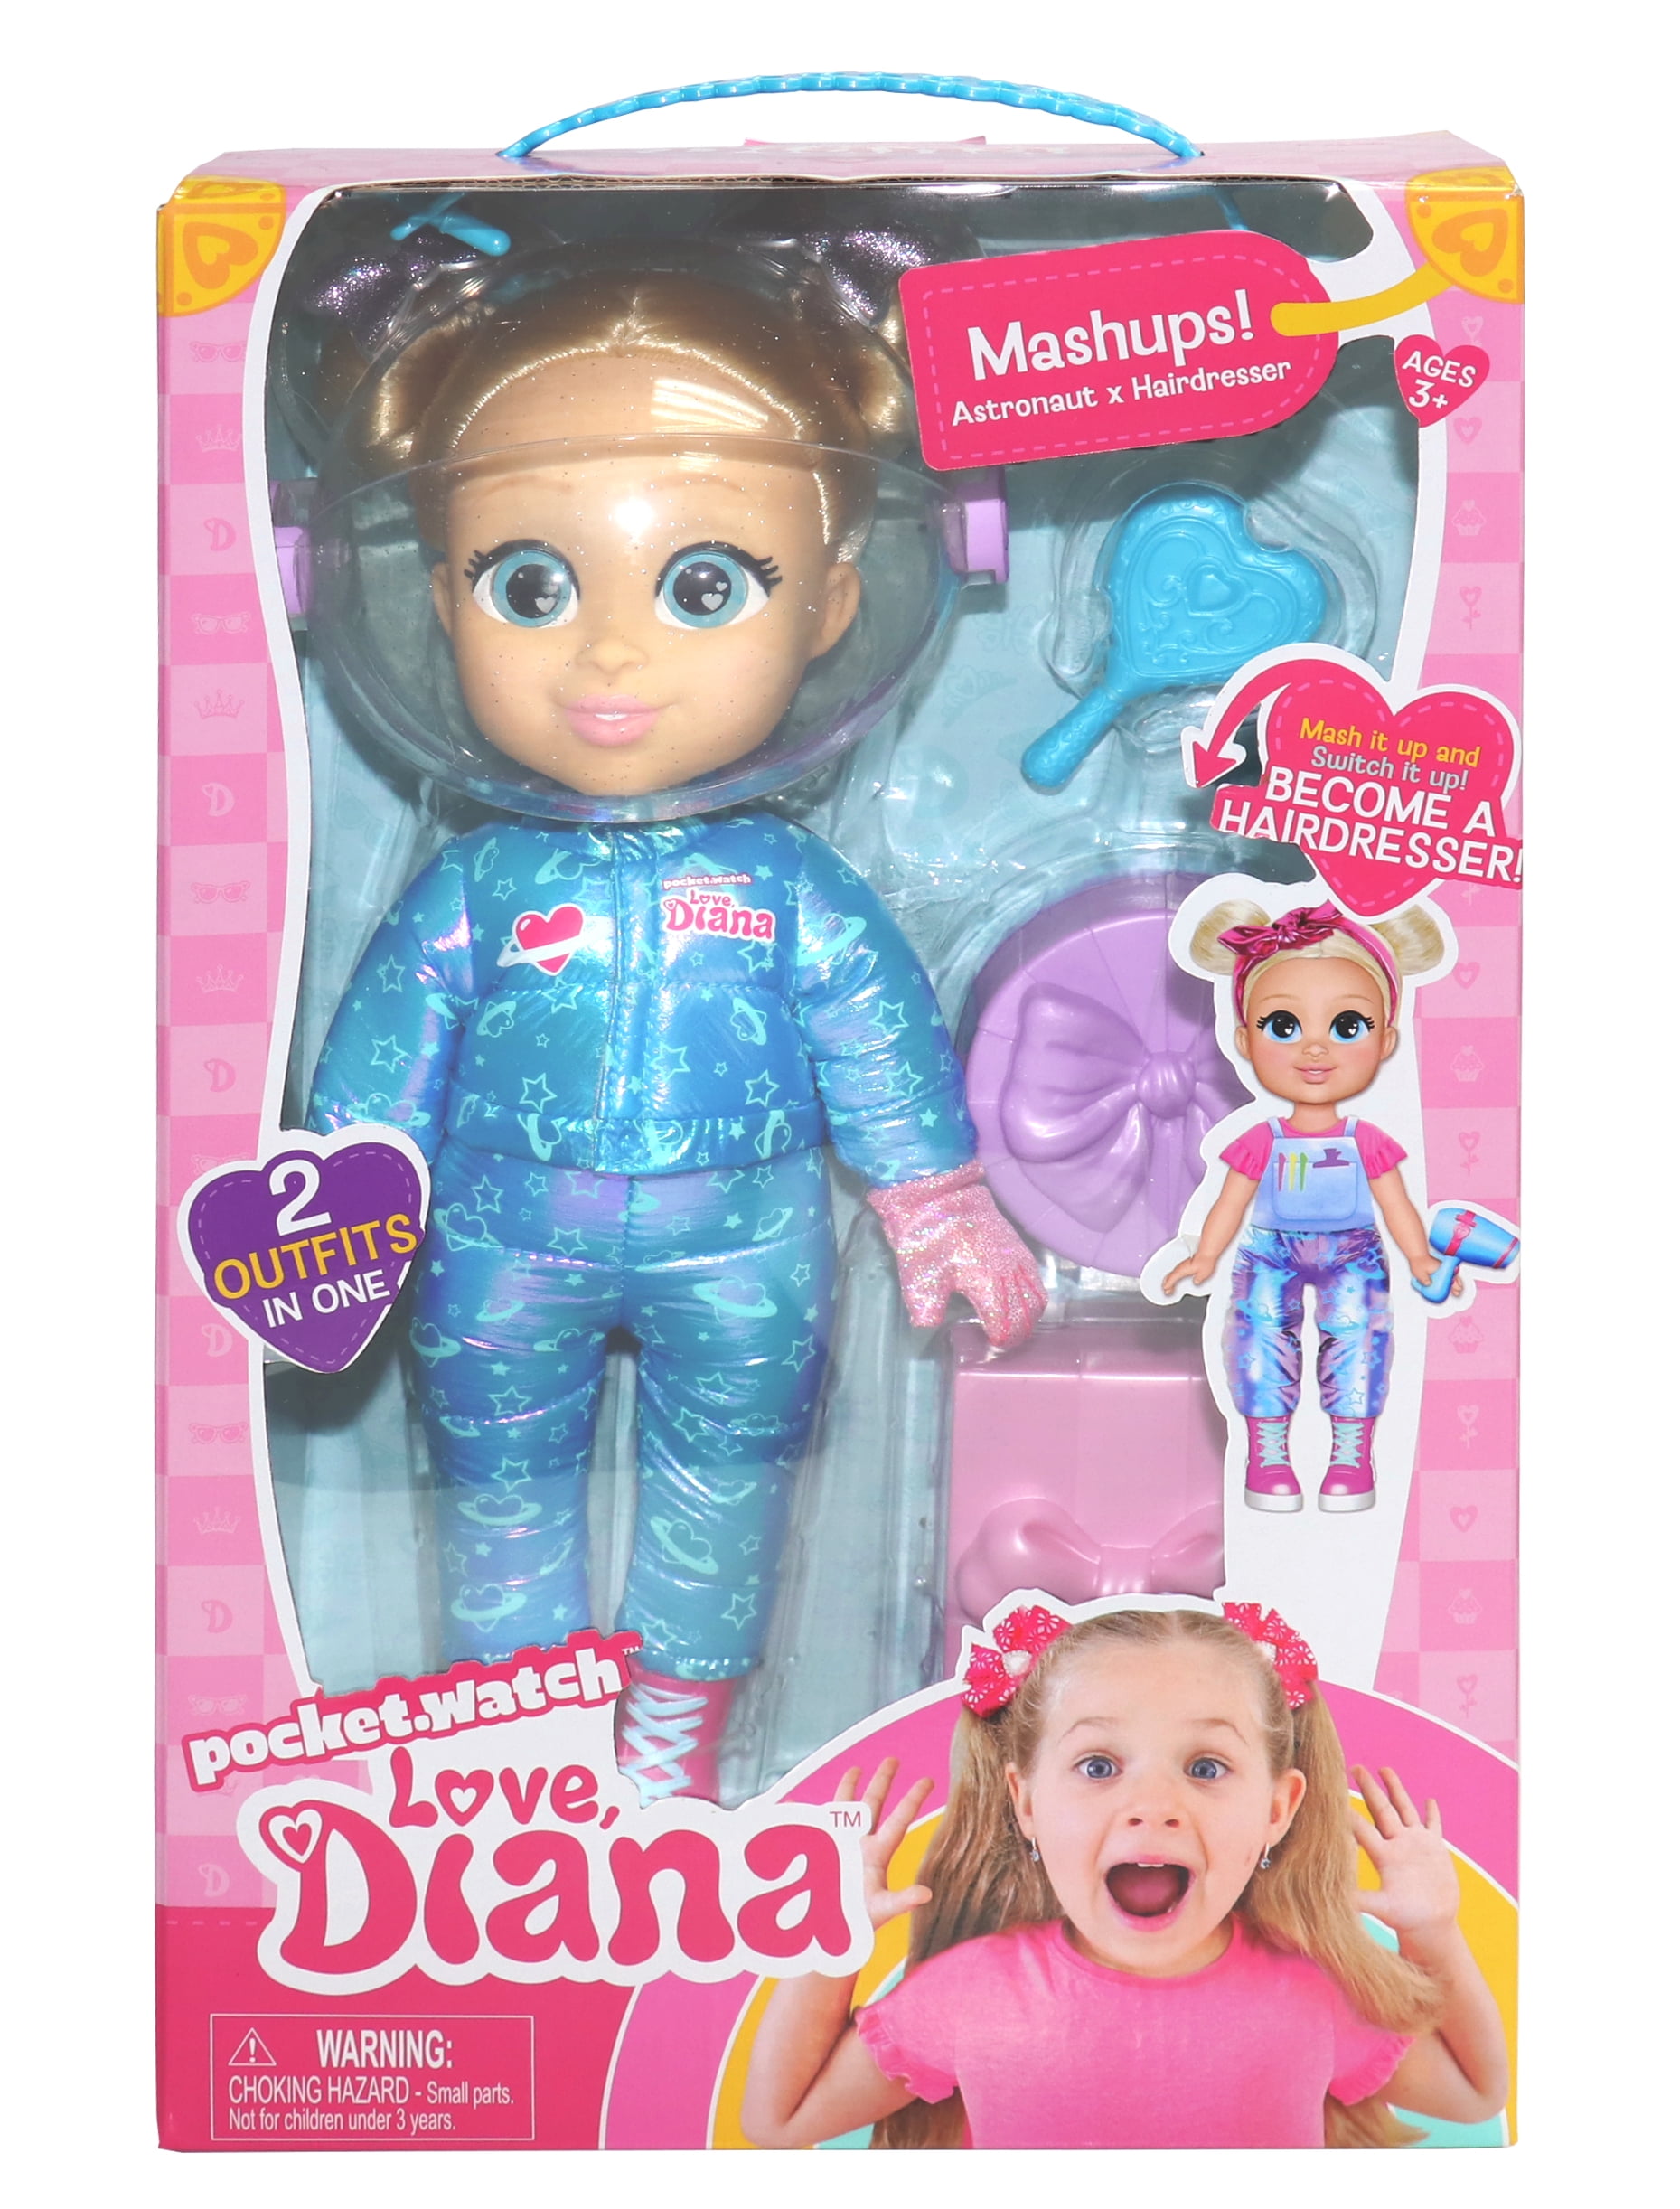 LOVE DIANA Mashups DOCTOR 6" Doll & Brush PocketWatch CHRISTMAS TOY 2020 NEW